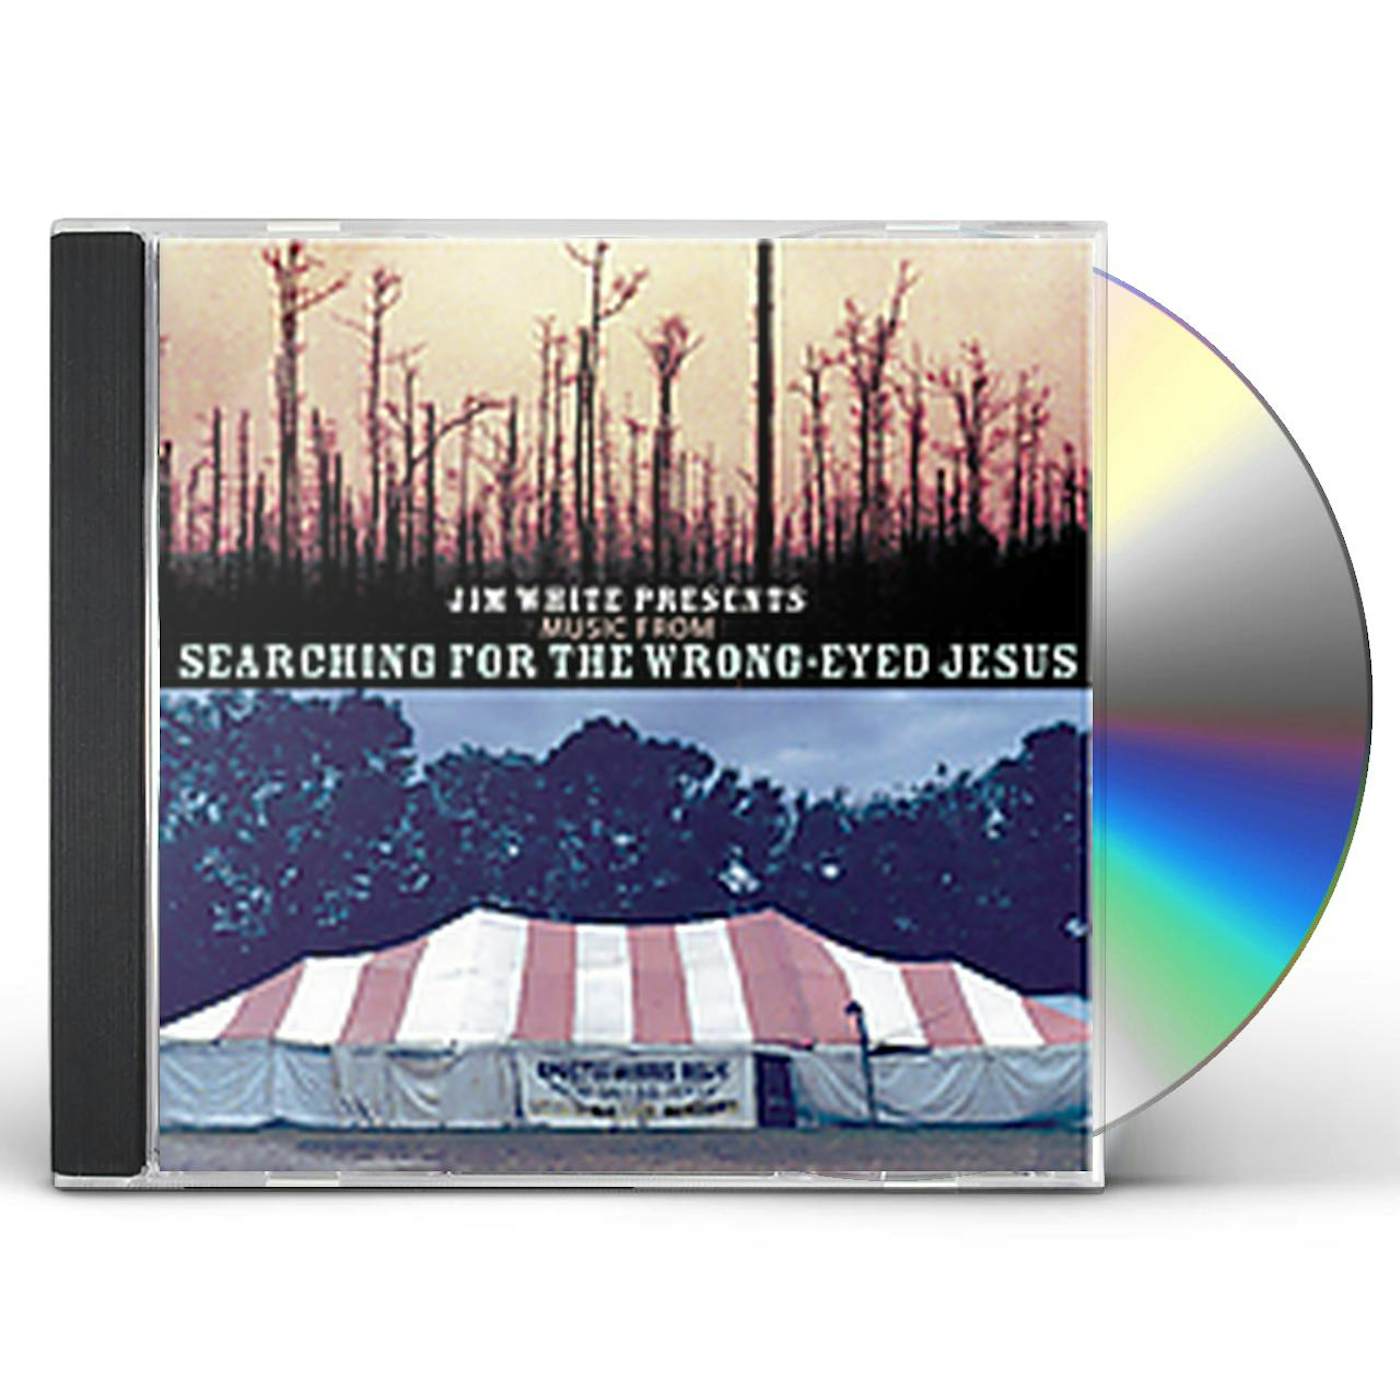 JIM WHITE PRESENTS MUSIC FROM SEARCHING FOR WRONG CD